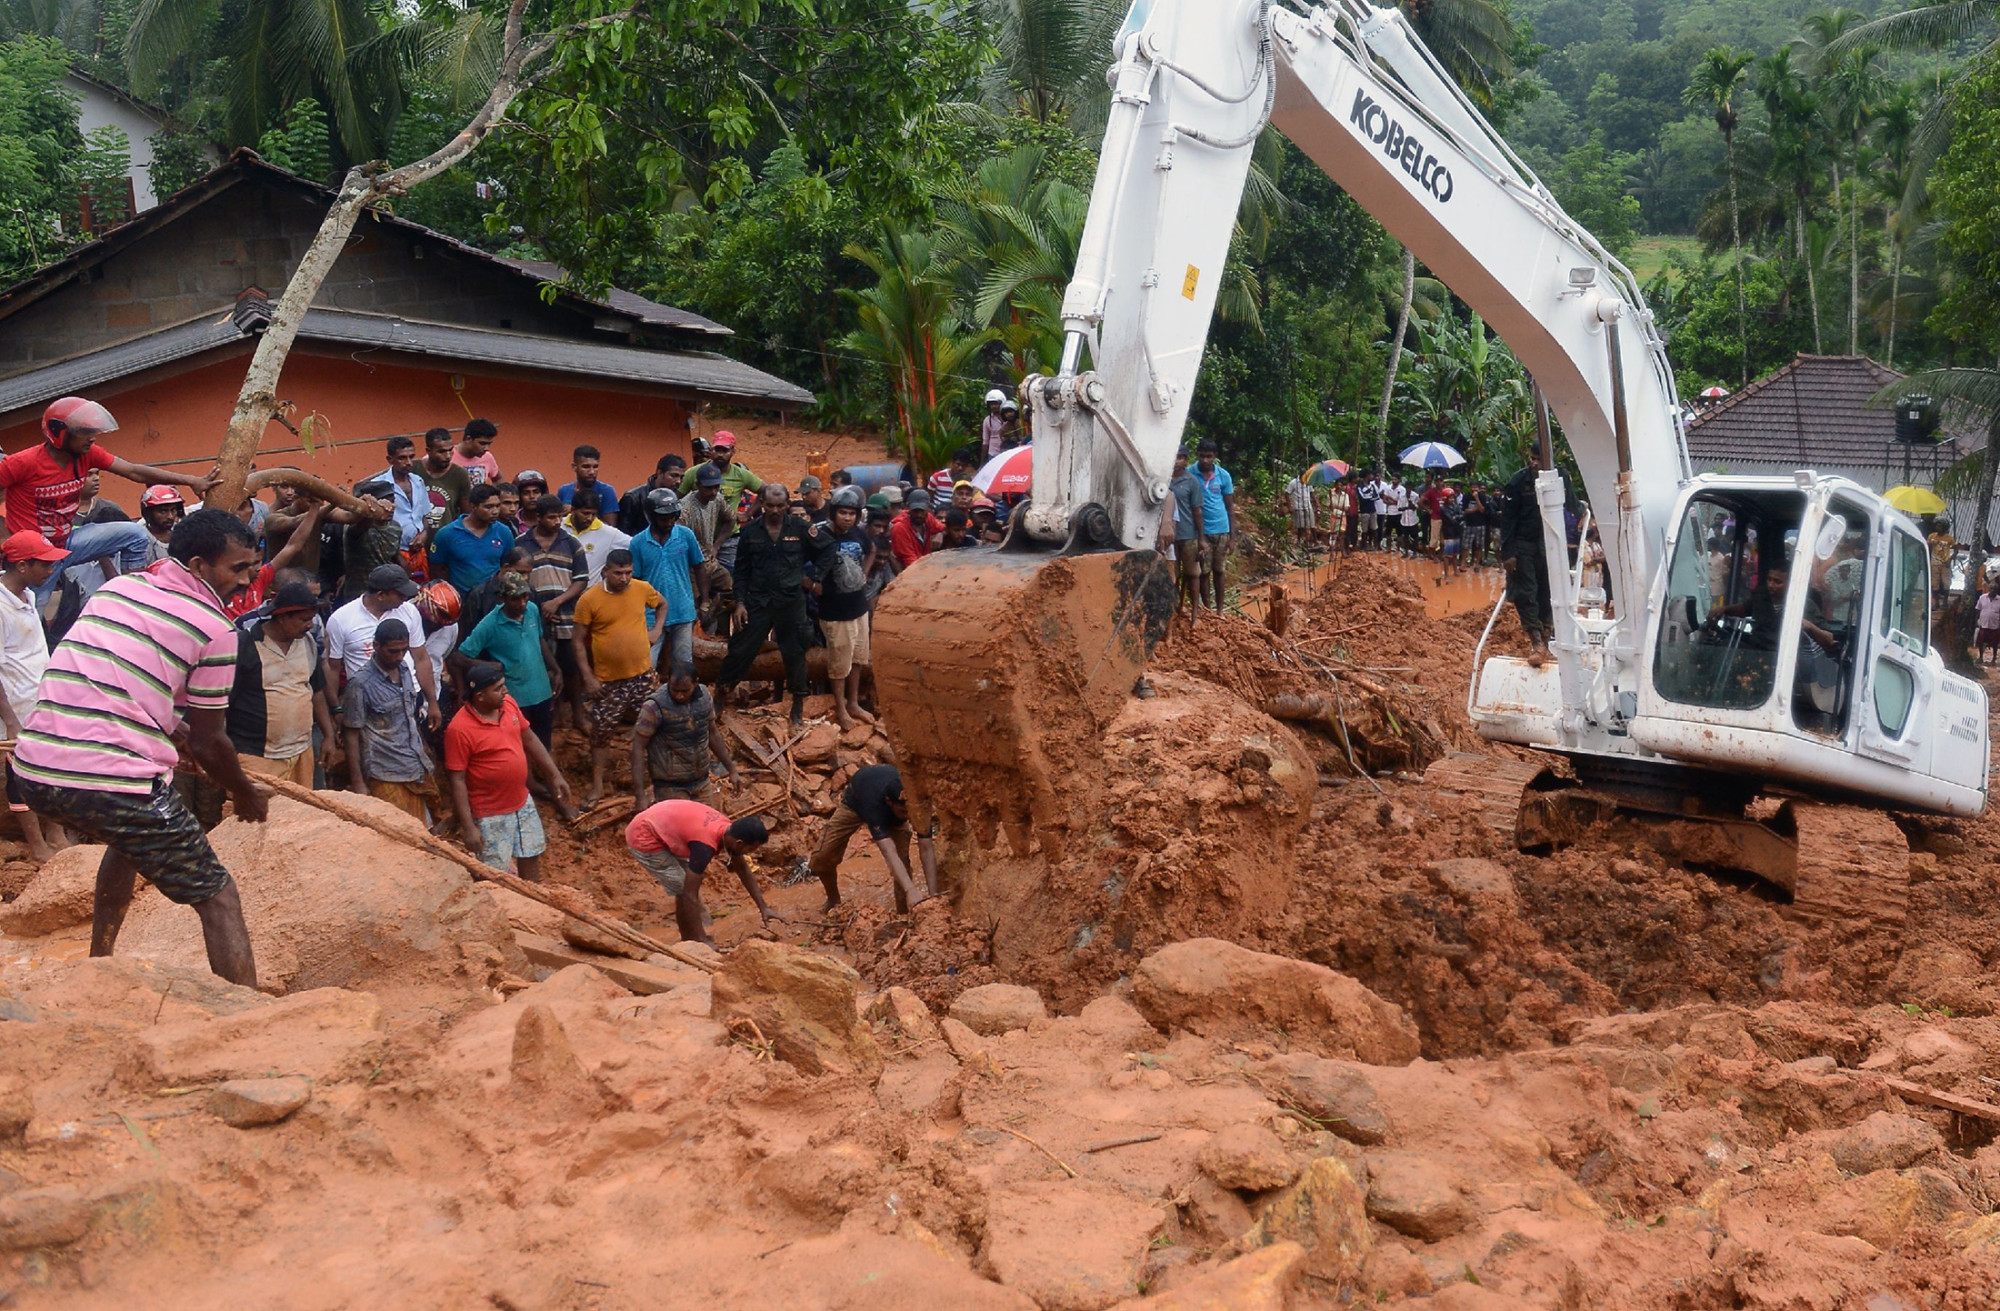 Rescue workers and villagers search for survivors at the site of a mudslide in Bellana village in Kalutara, Sri Lanka, on May 26.
